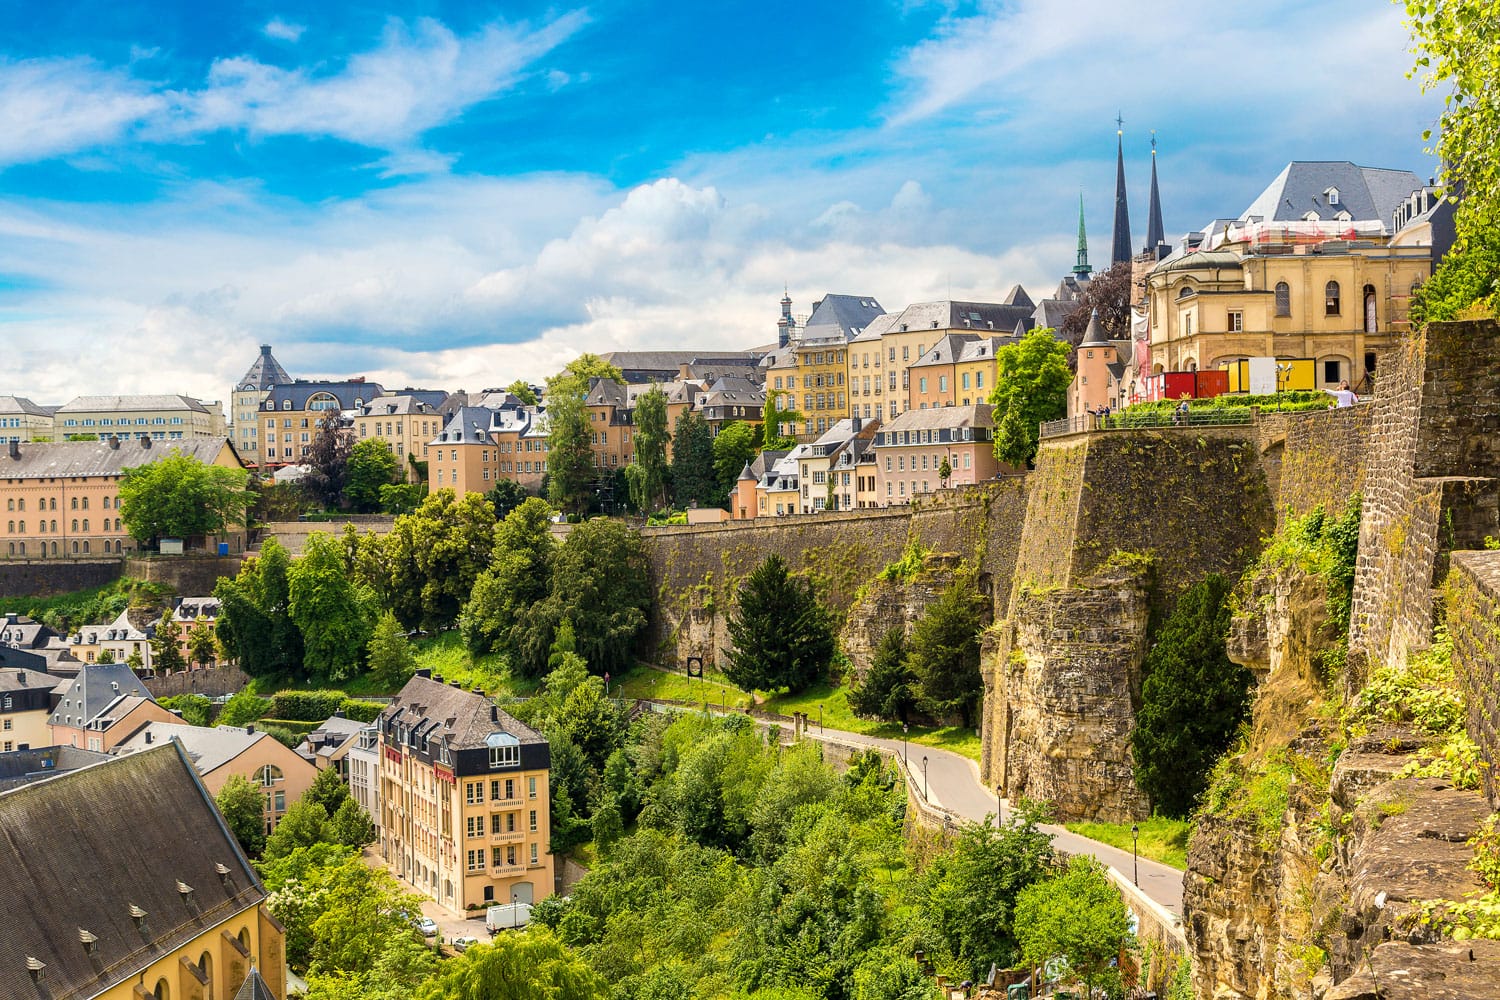 Panoramic aerial view of Luxembourg in a beautiful summer day, Luxembourg